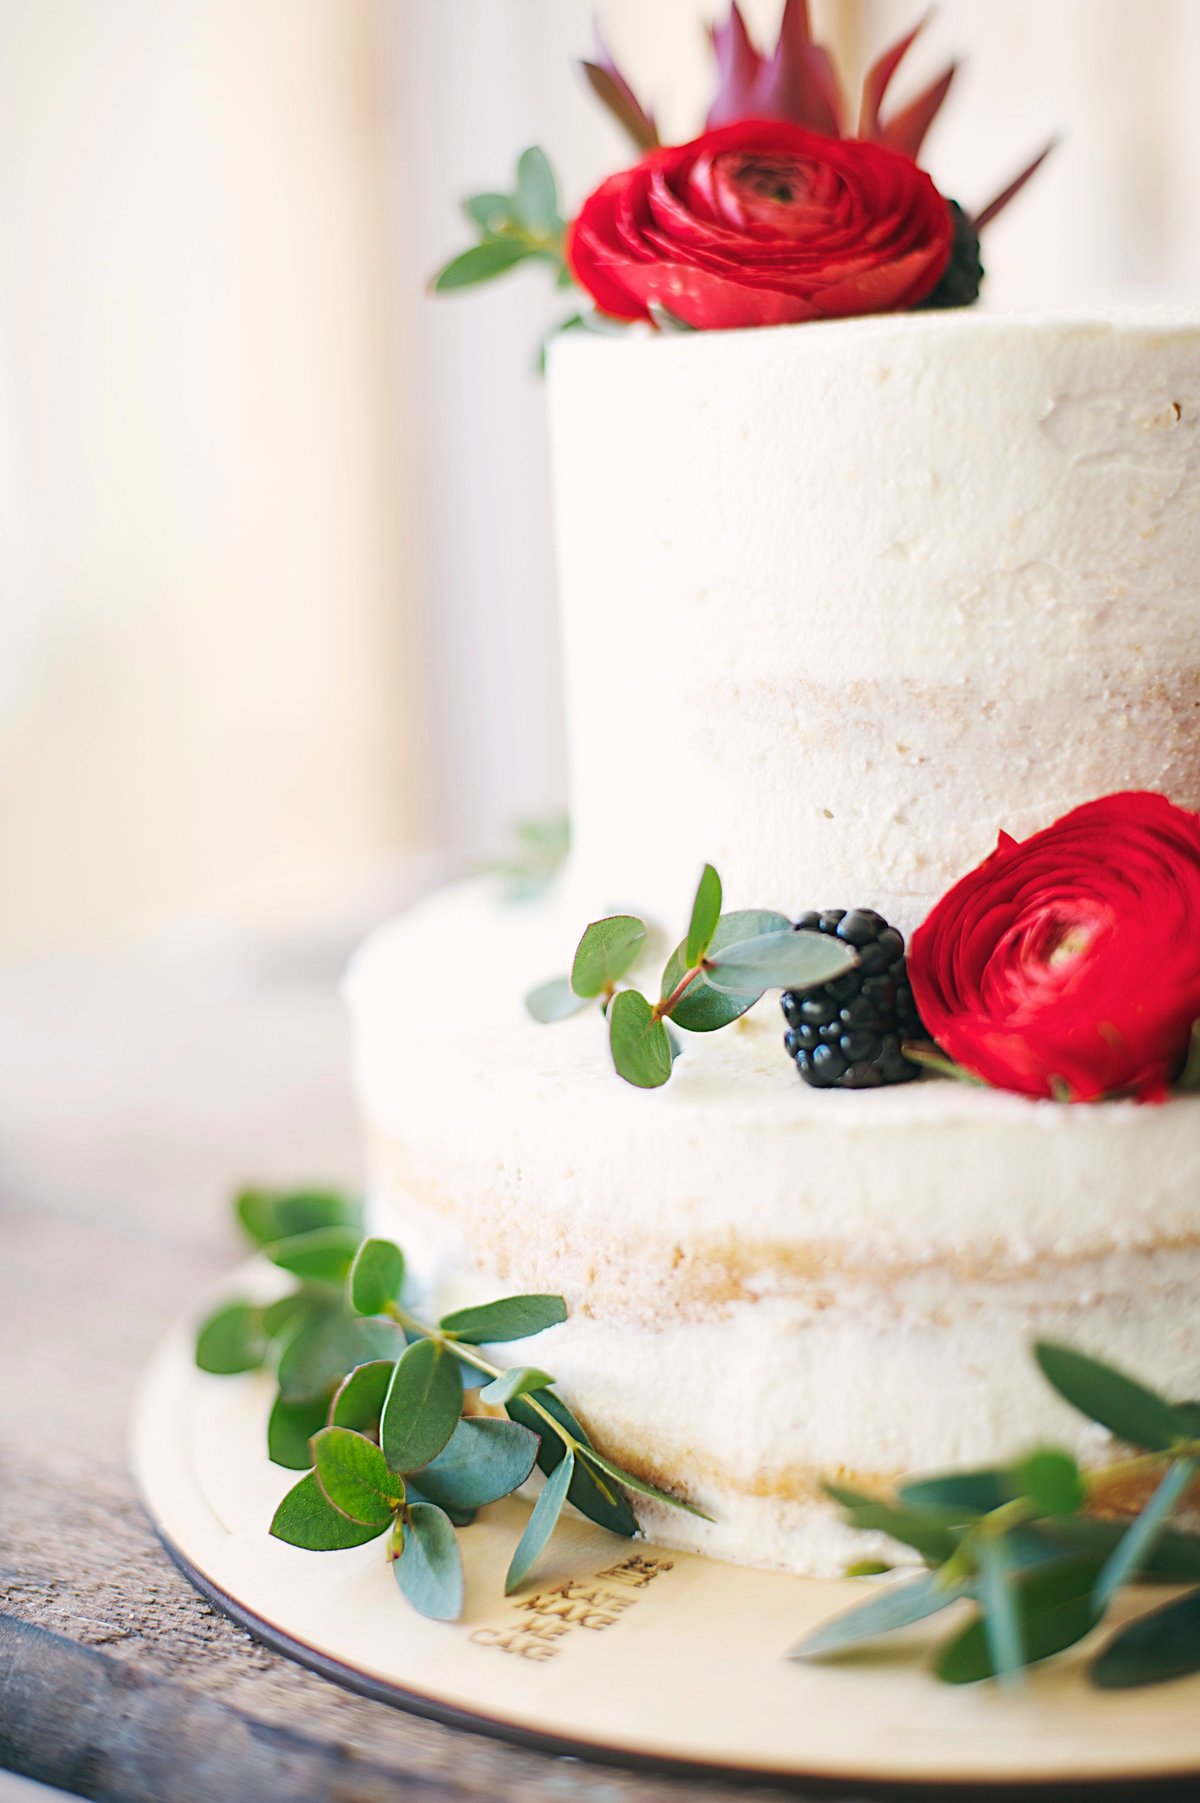 close-up-photography-of-cake-with-flower-decor-1070852